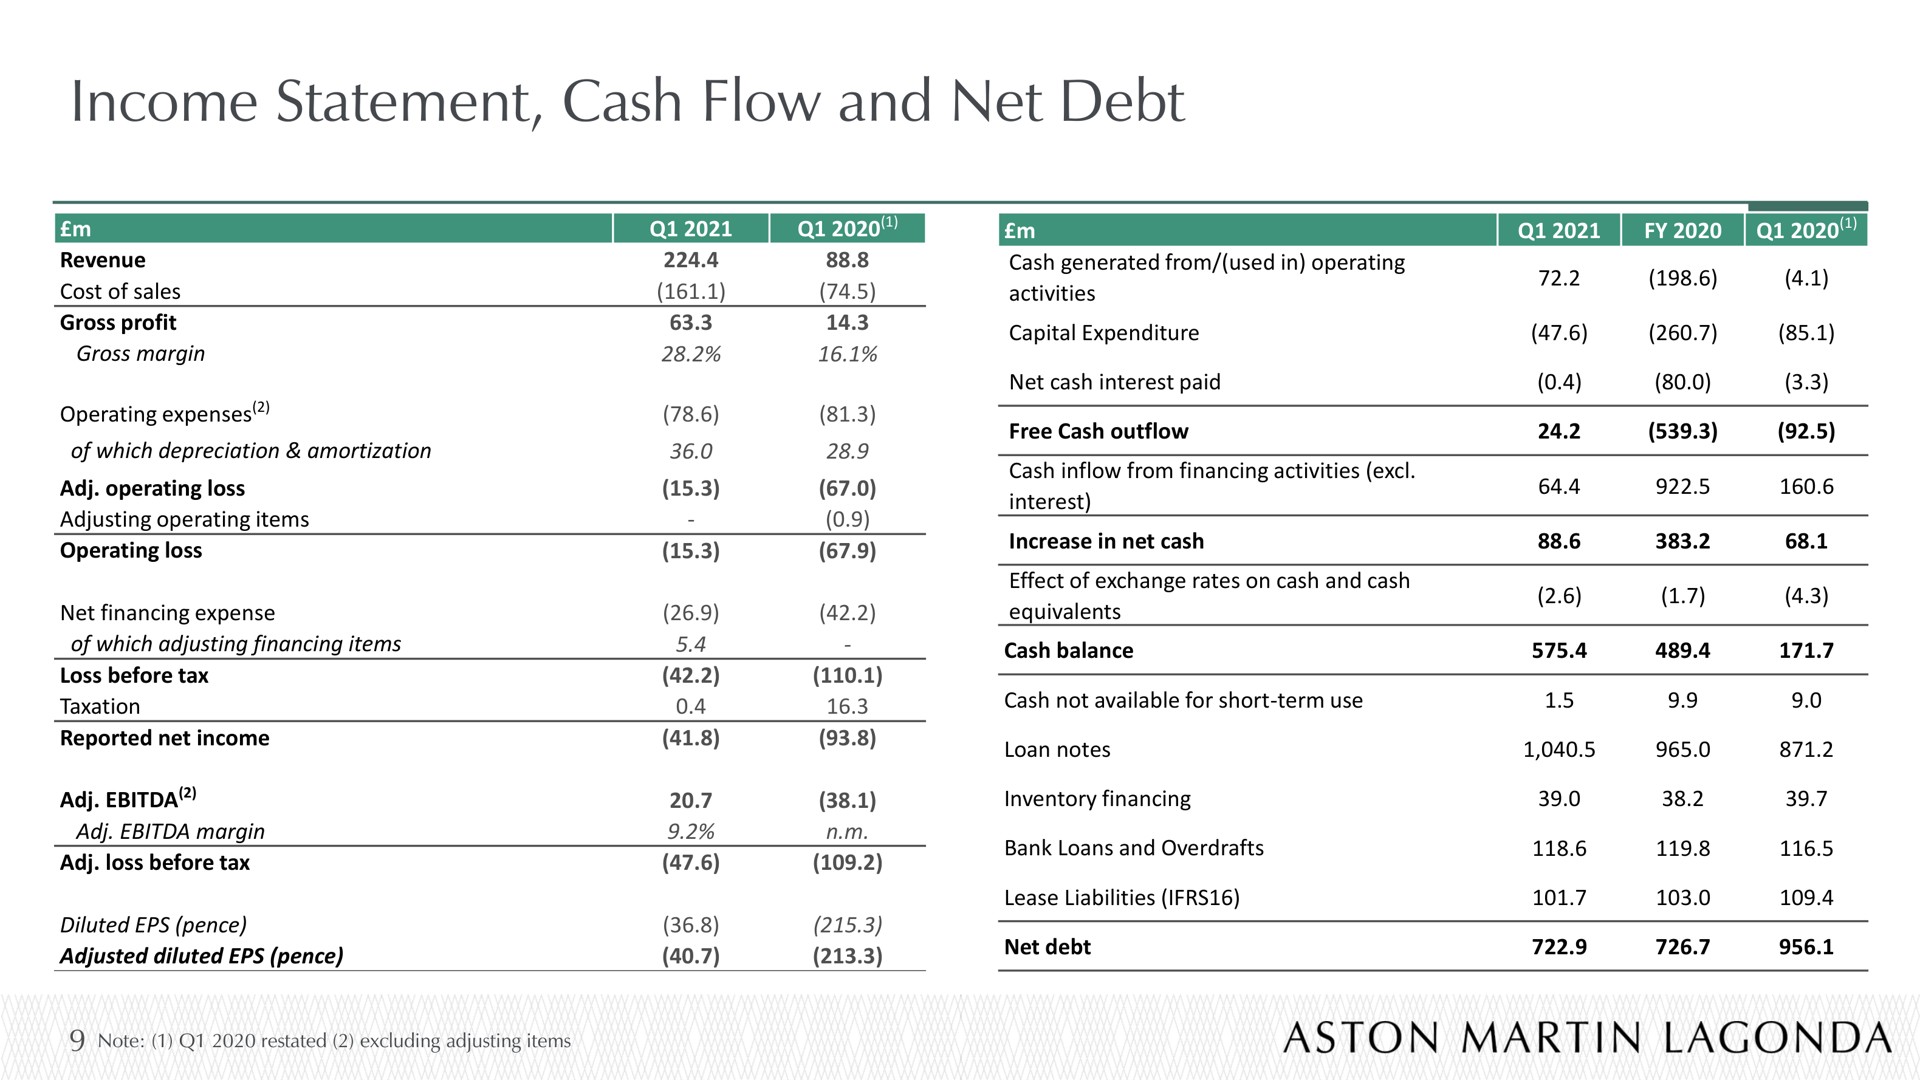 income statement cash flow and net debt ree | Aston Martin